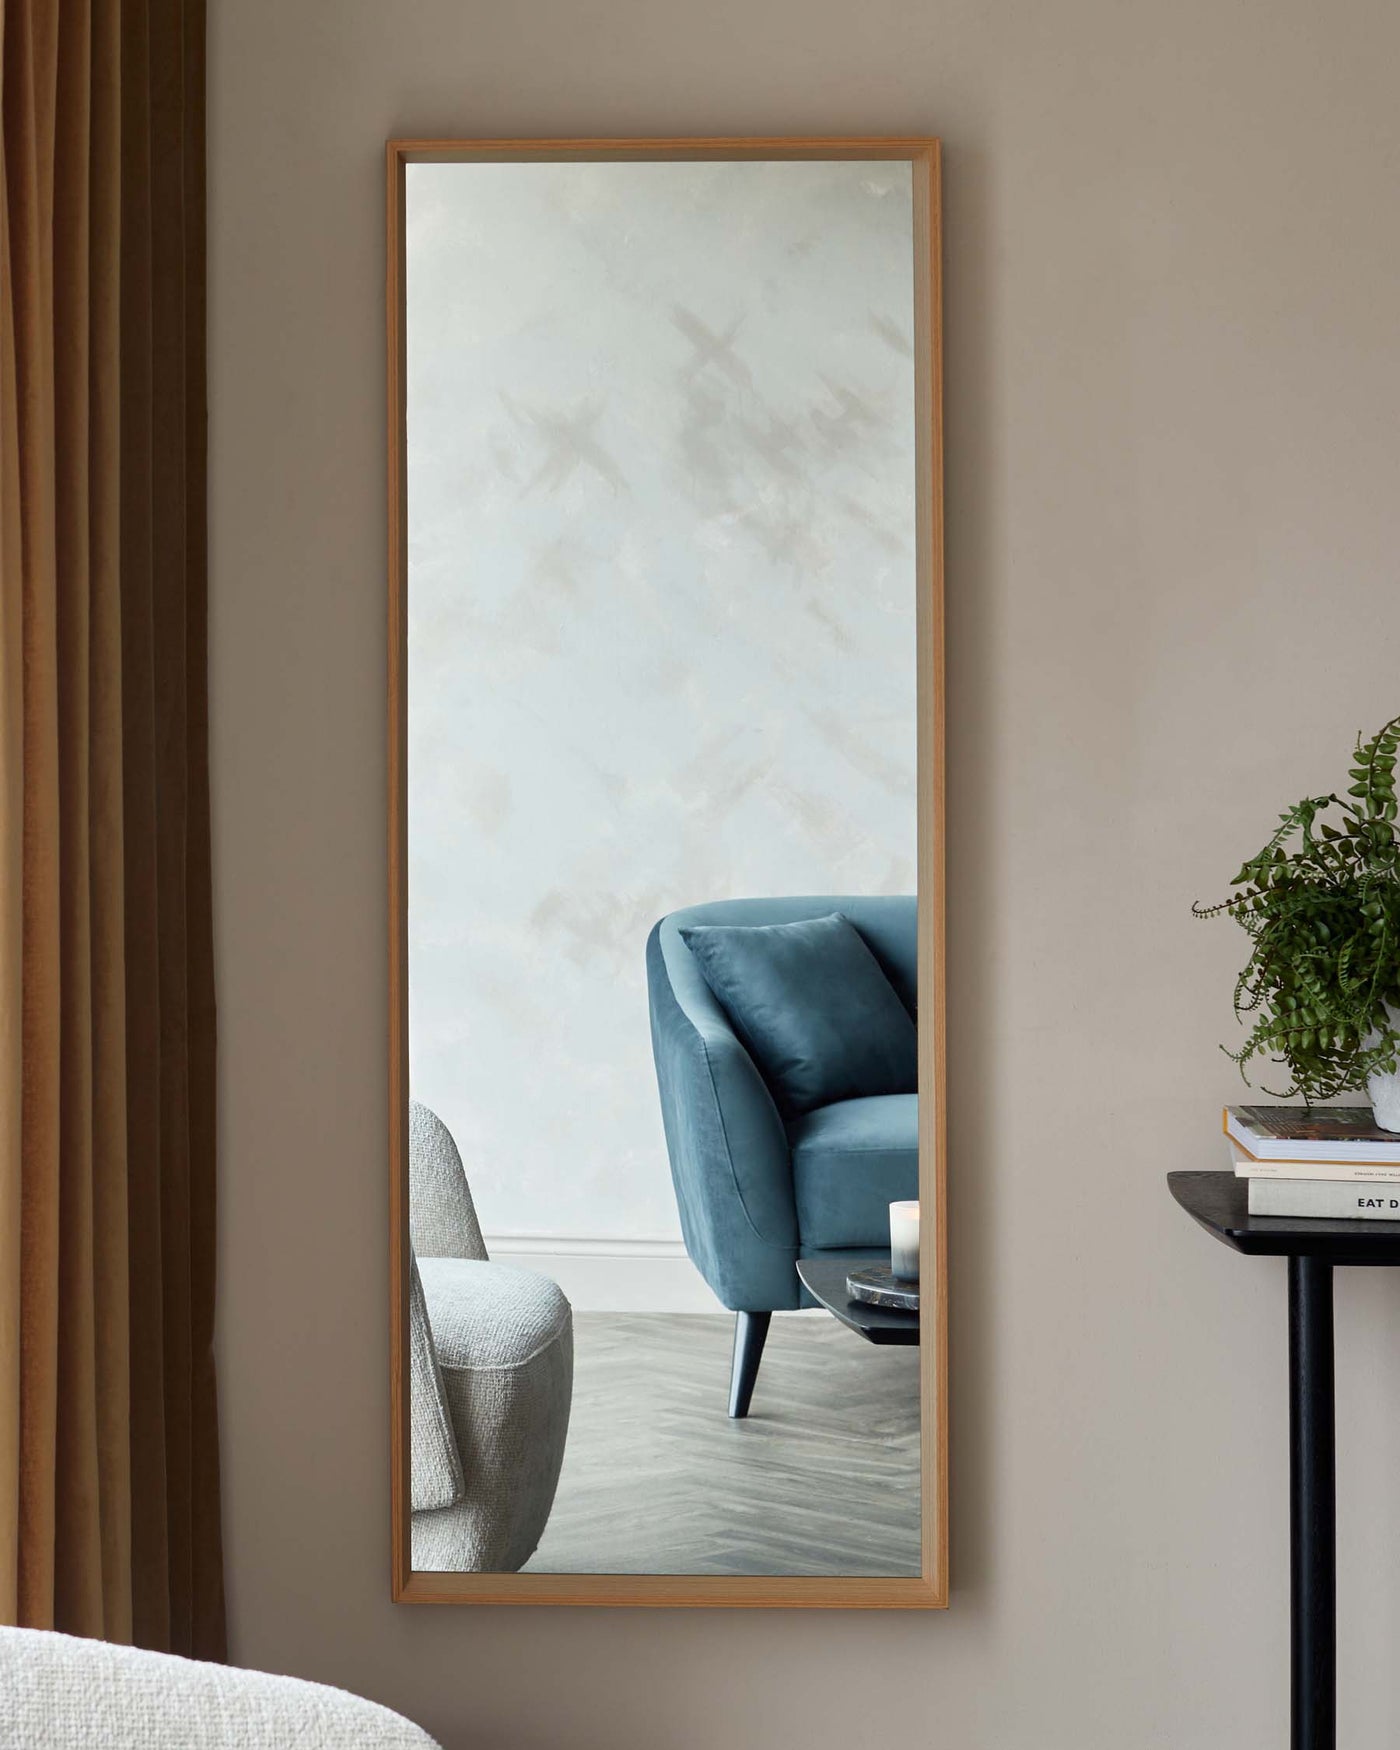 A modern teal blue armchair with a smooth, plush finish and angular black legs reflected in a large vertical mirror with a warm wooden frame. Beside it is a small black side table holding books and a potted plant, adding a cosy touch to the contemporary setting.